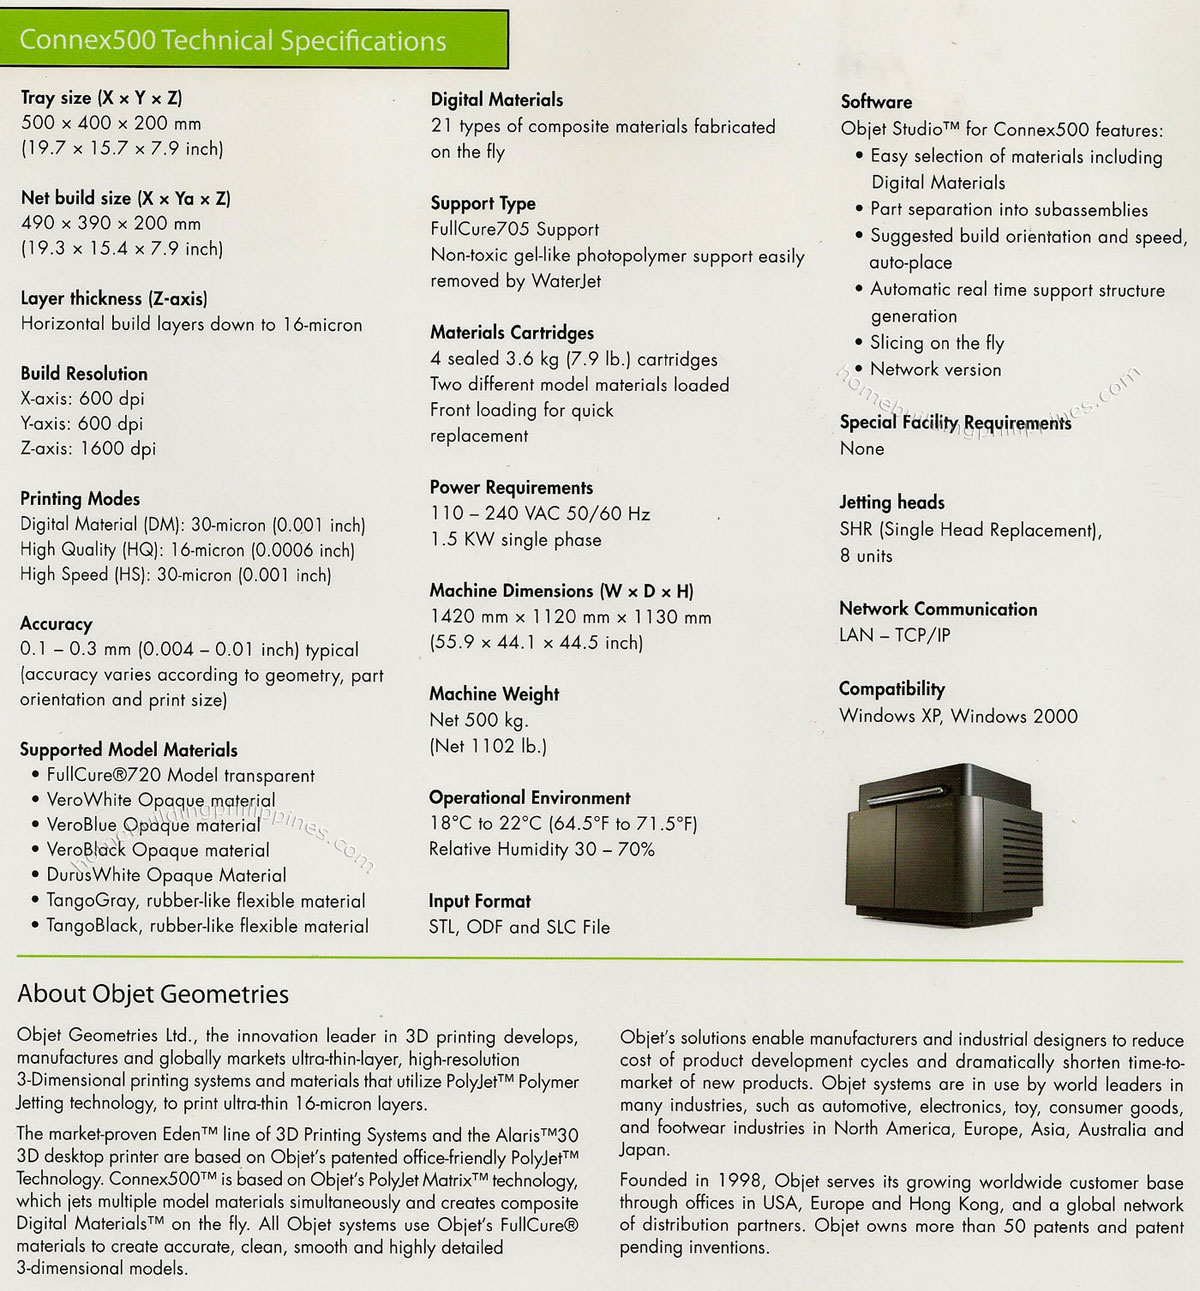 Connex500 Technical Specifications, About Objet Geometries